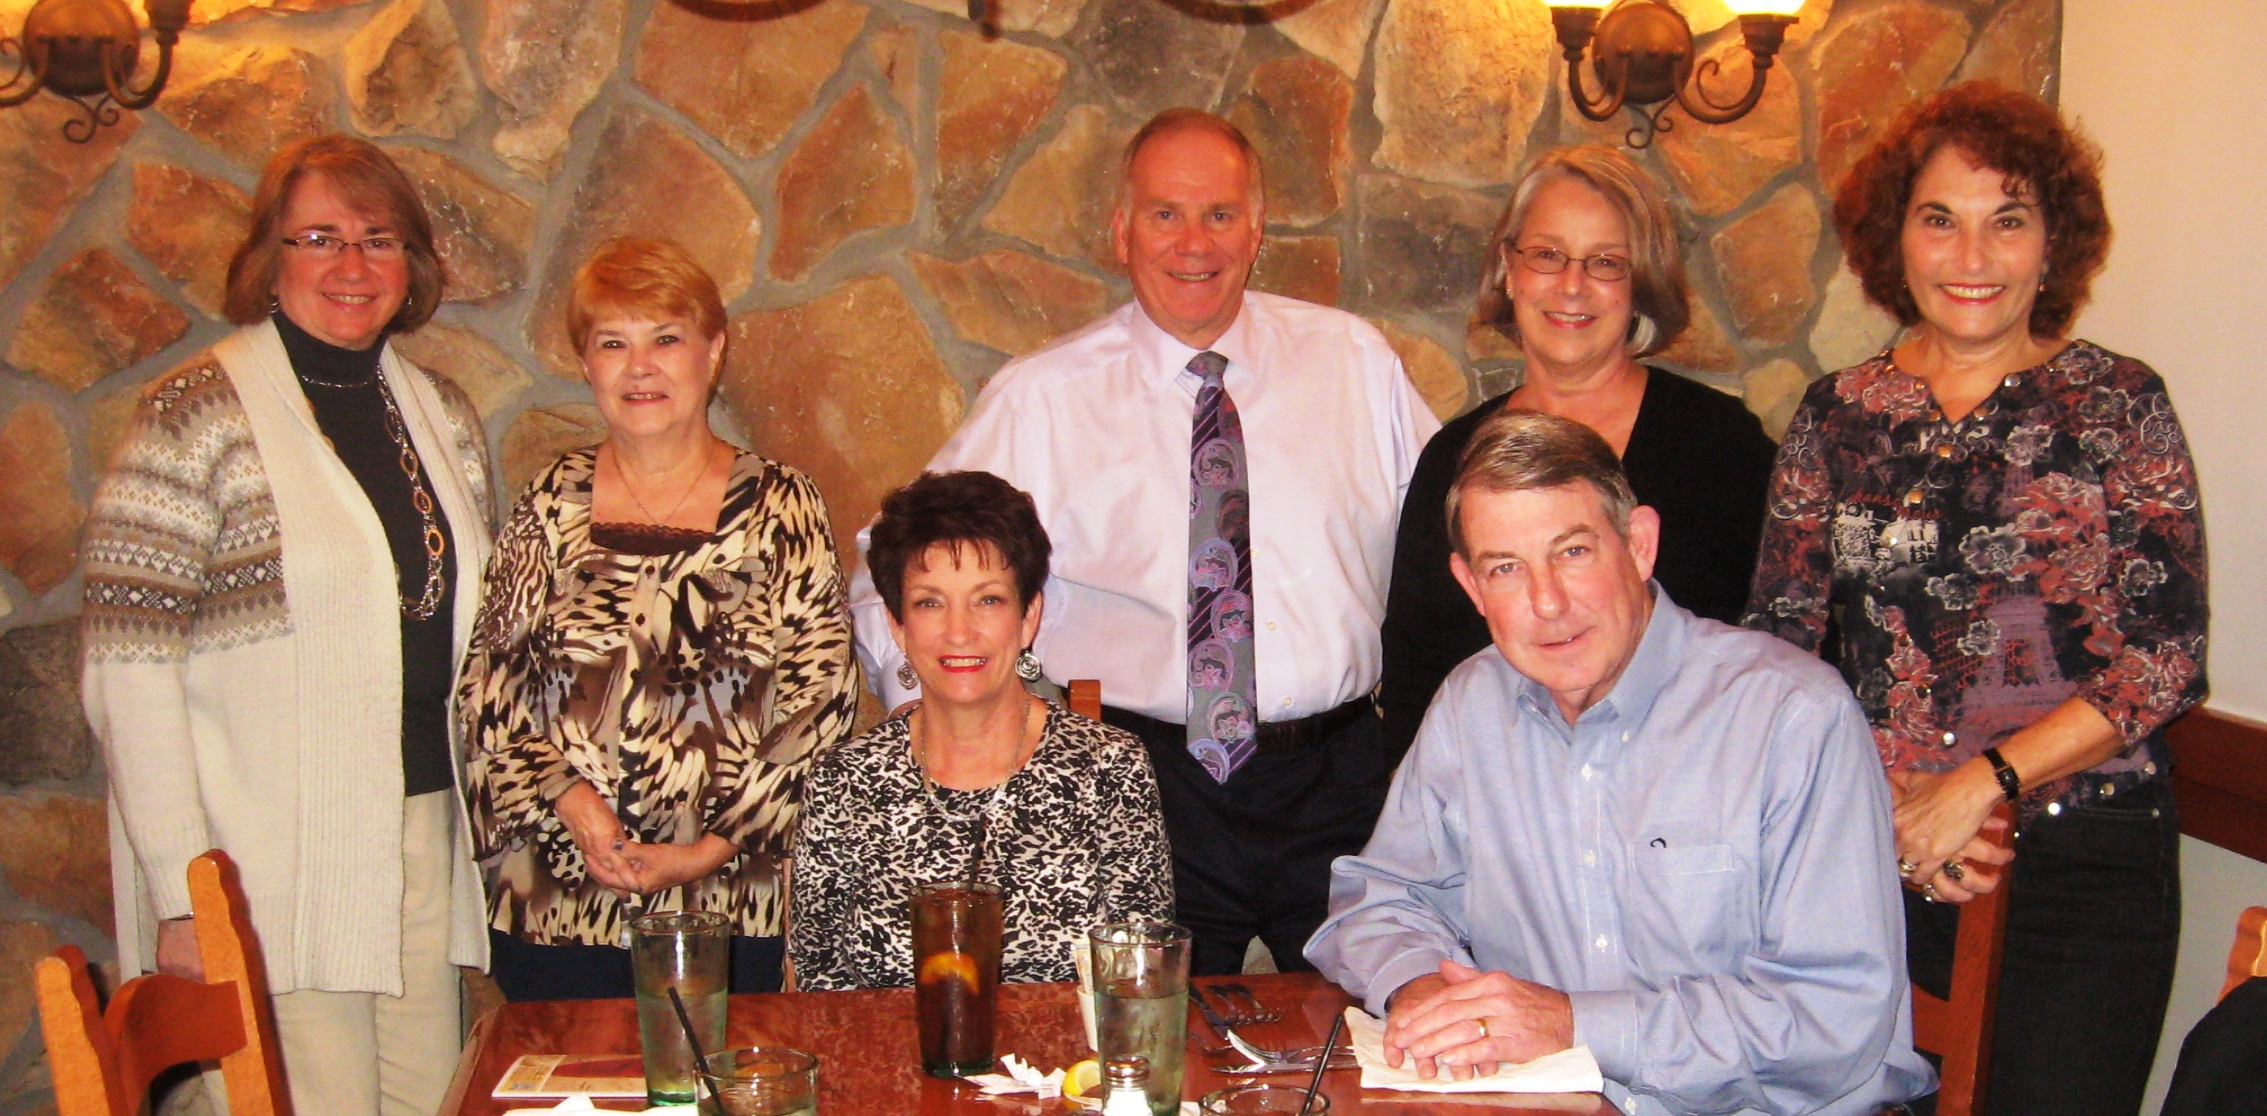 Class of '66 lunch at Olive Garden on Friday, October 26, 2012. Standing are Mary Nancy Smith, Connie Williams, David Wyse, Jeri Jones and Alice Nierenberg. Sitting are Susie Harris and Dwight Woessner.